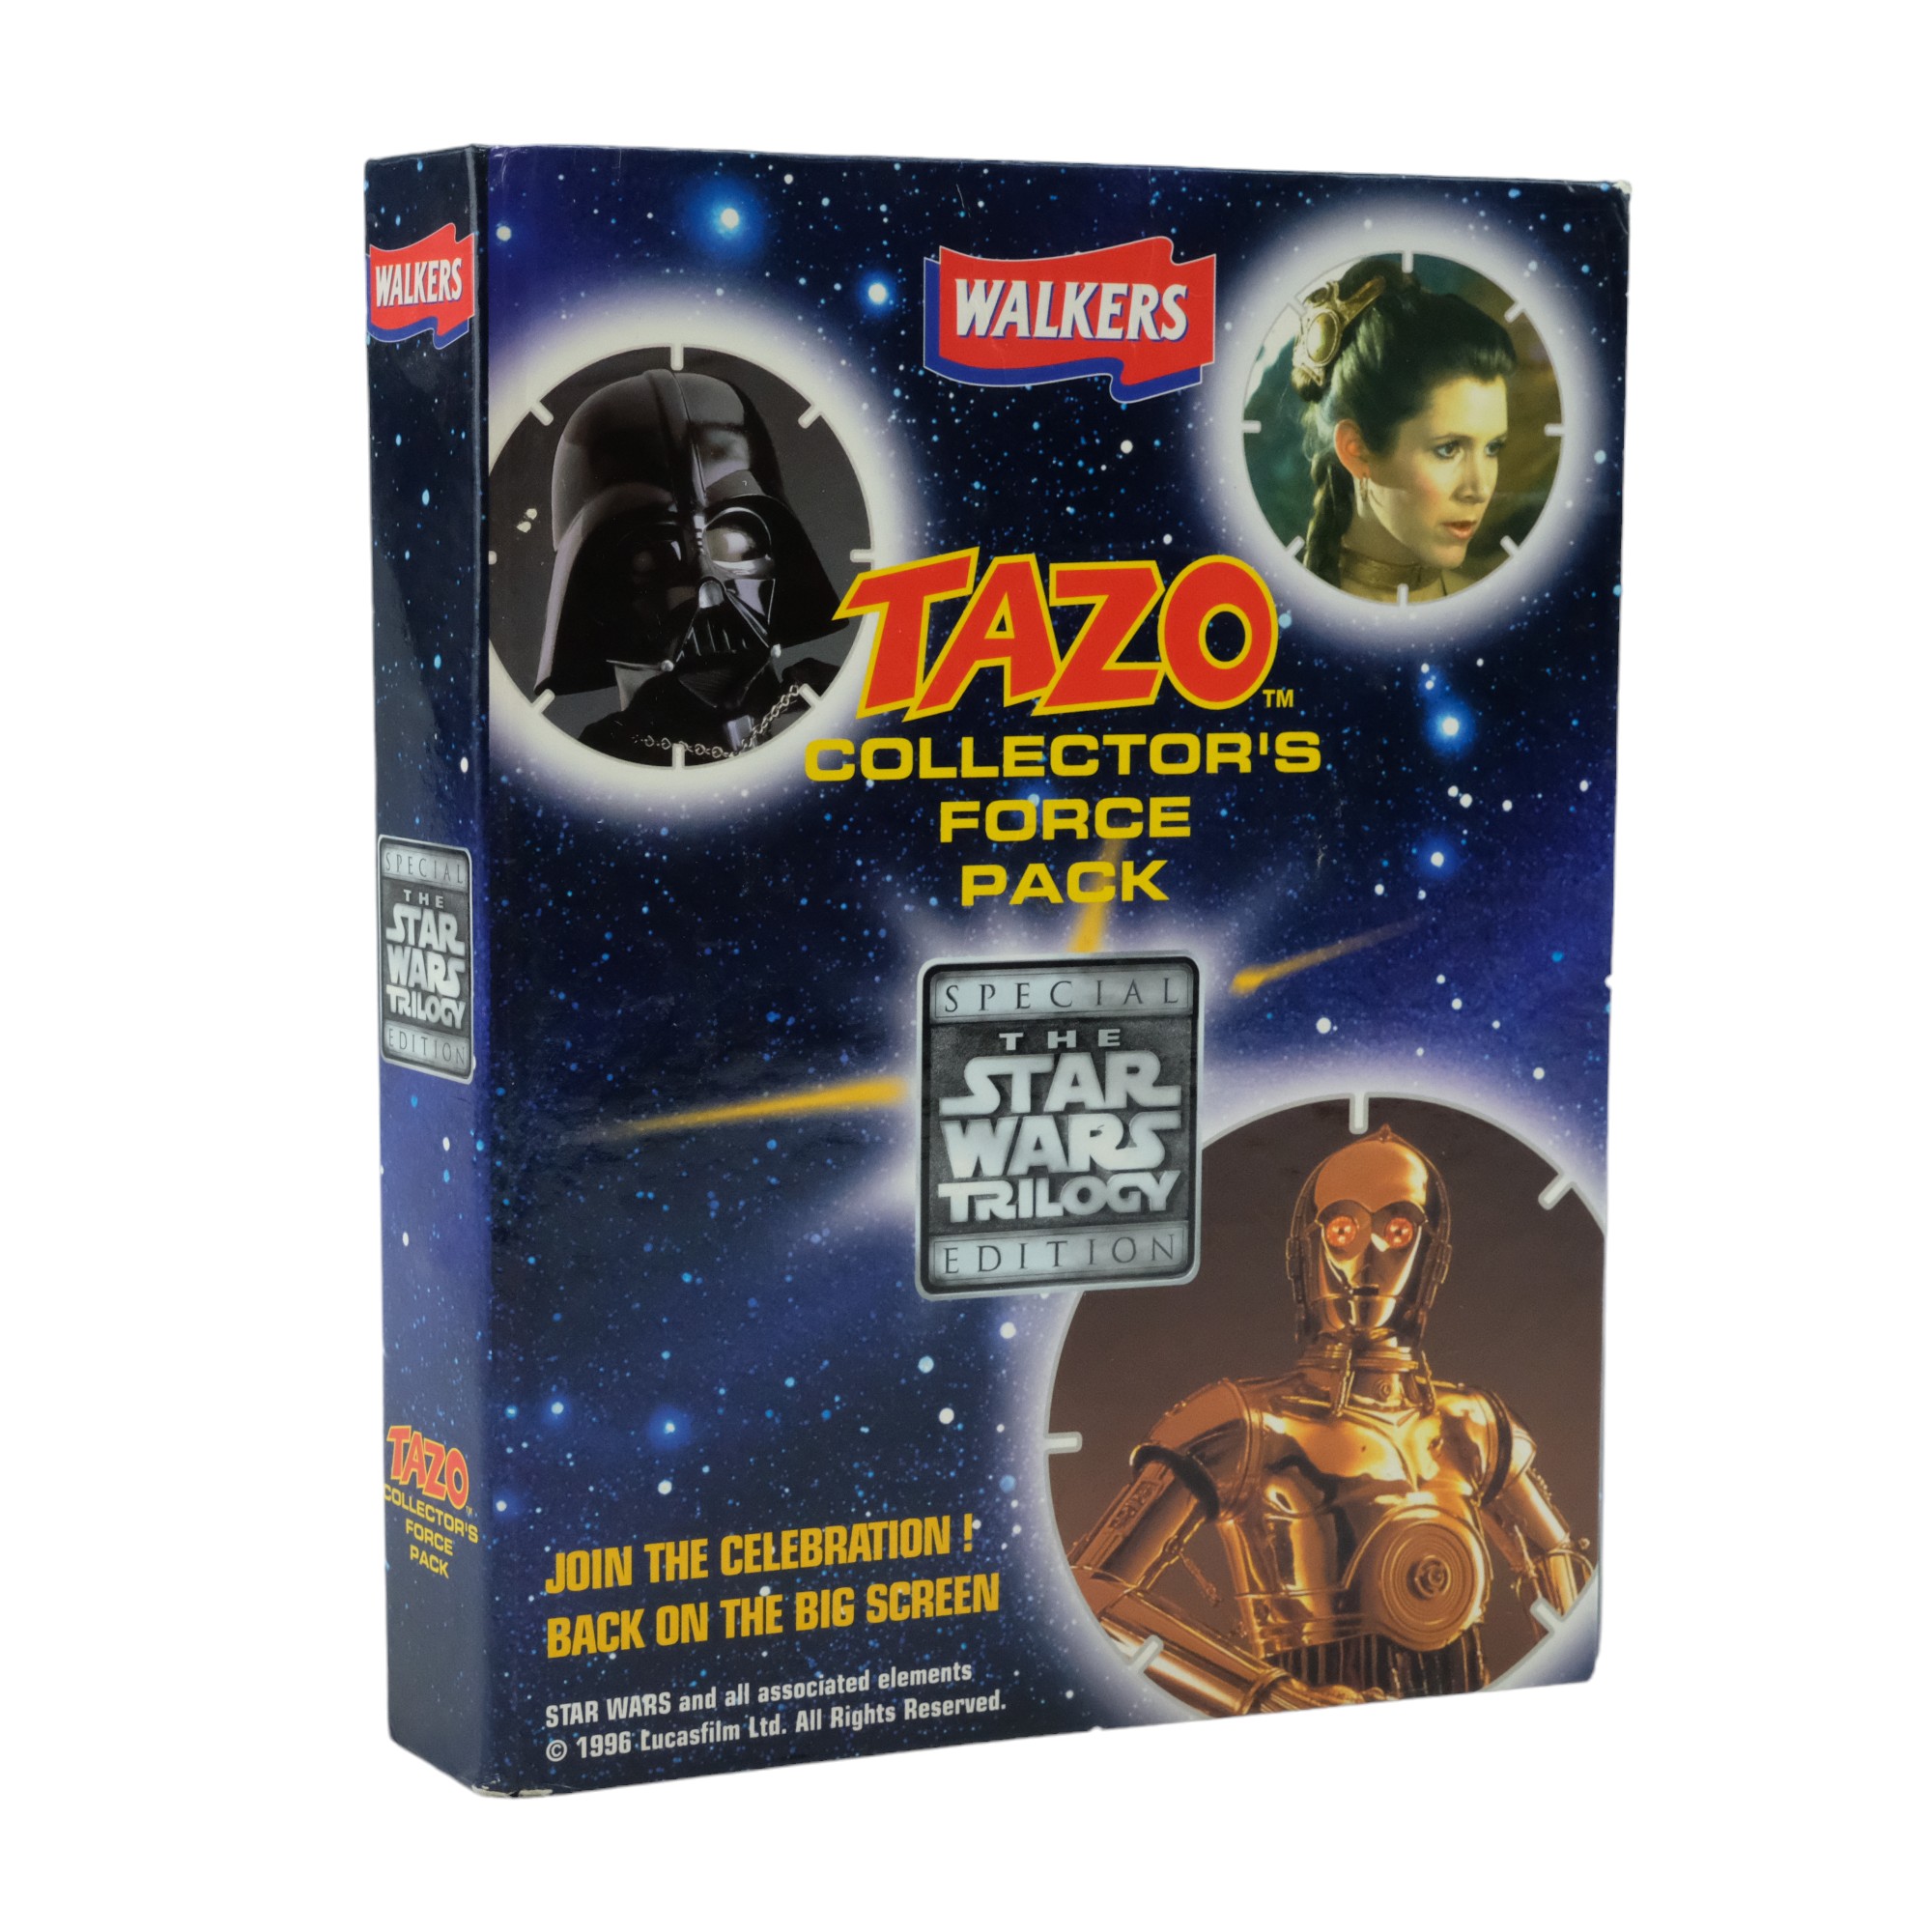 The Star Wars Trilogy edition Tazo collectors force pack